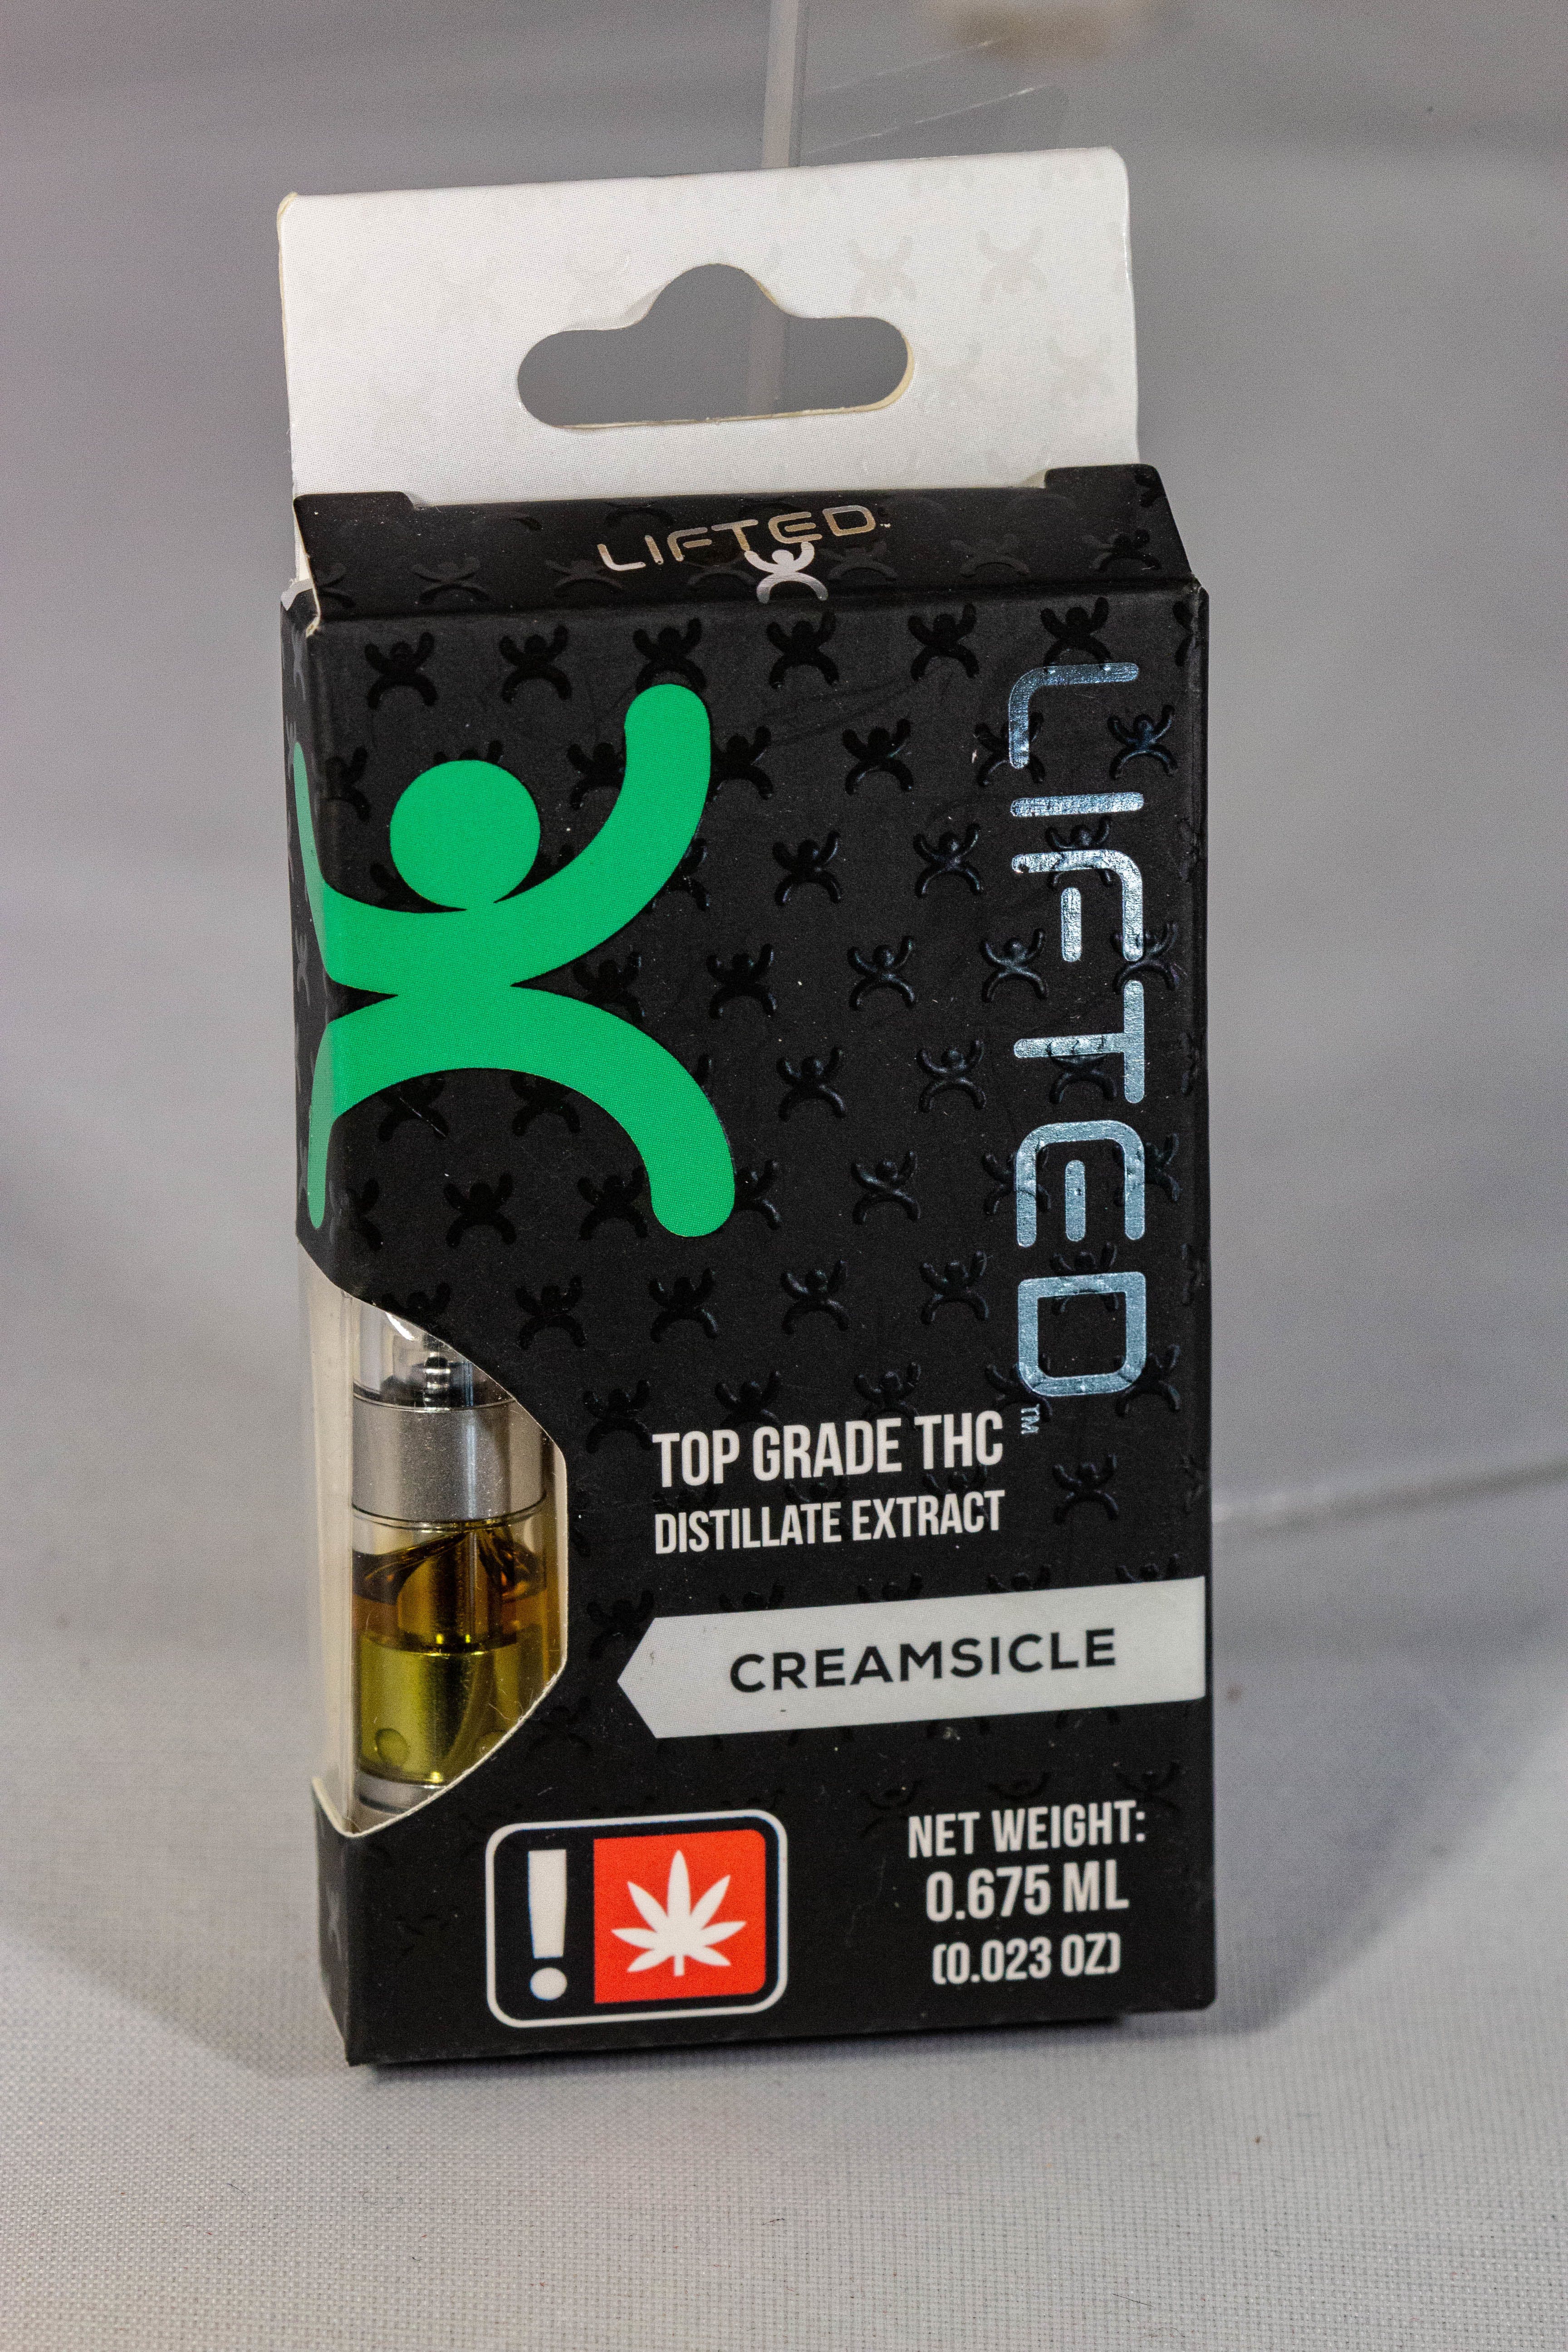 wax-creamsicle-5g-vape-cart-by-liftedgreen-acers-farms